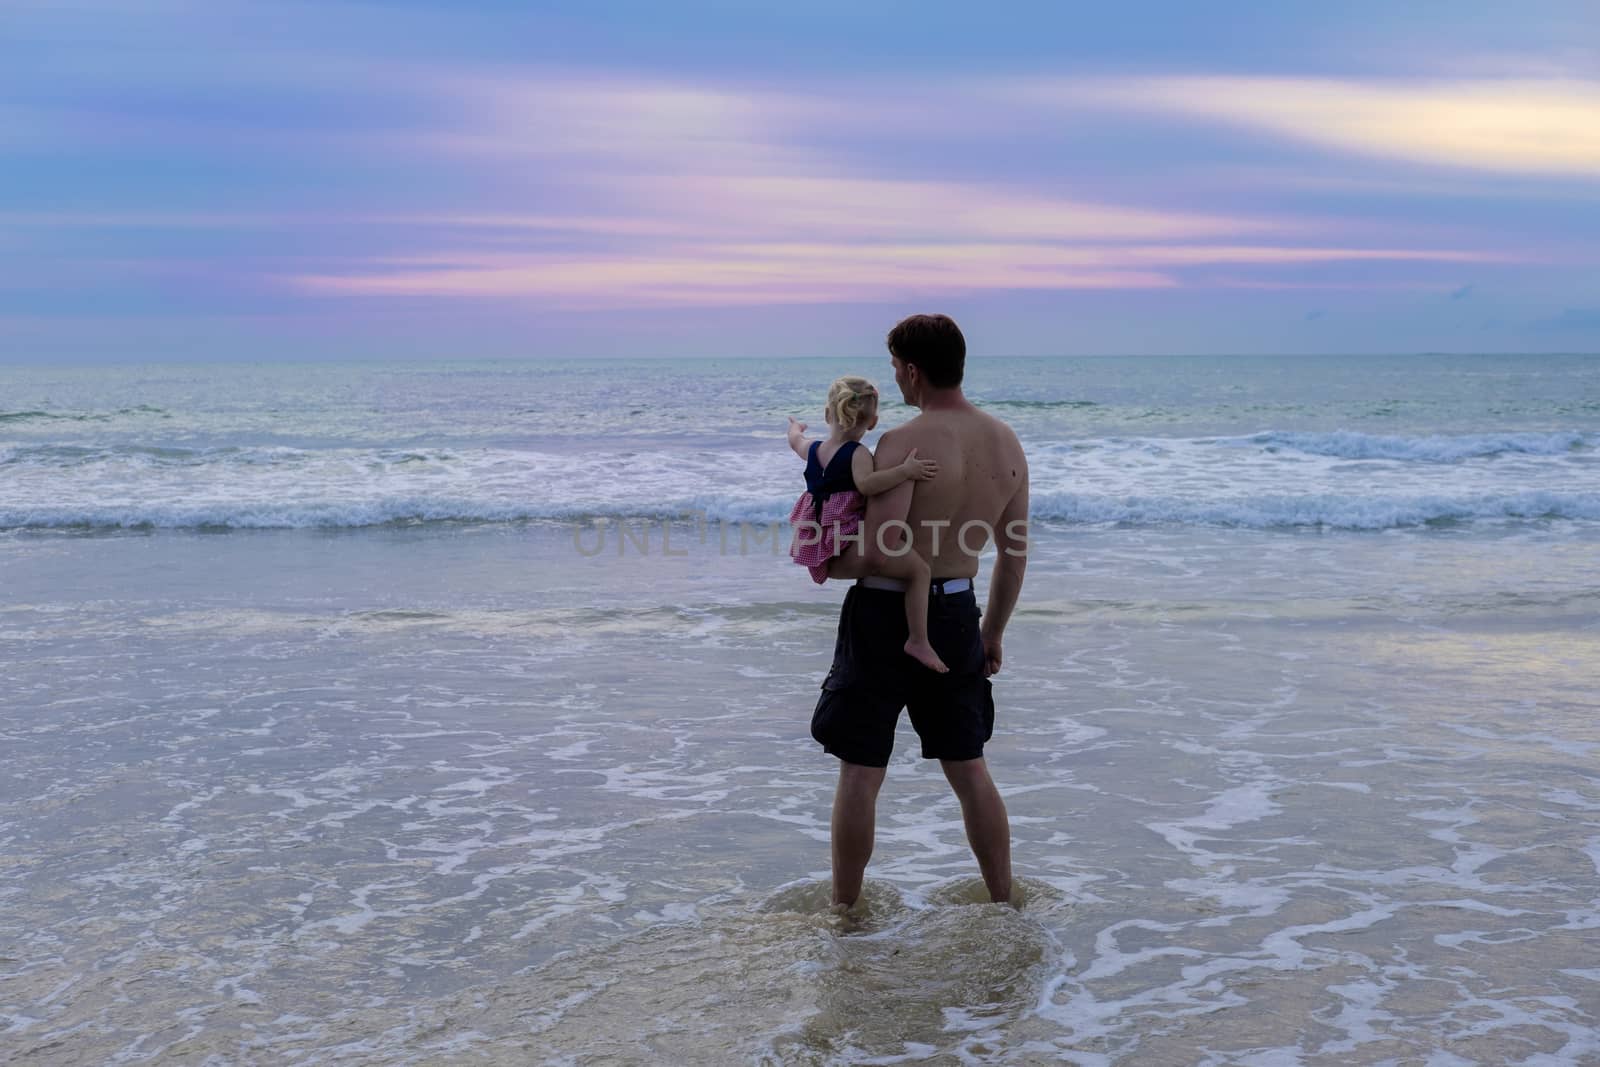 Father holds the daughter and shows her the beautiful spectacula by rainfallsup